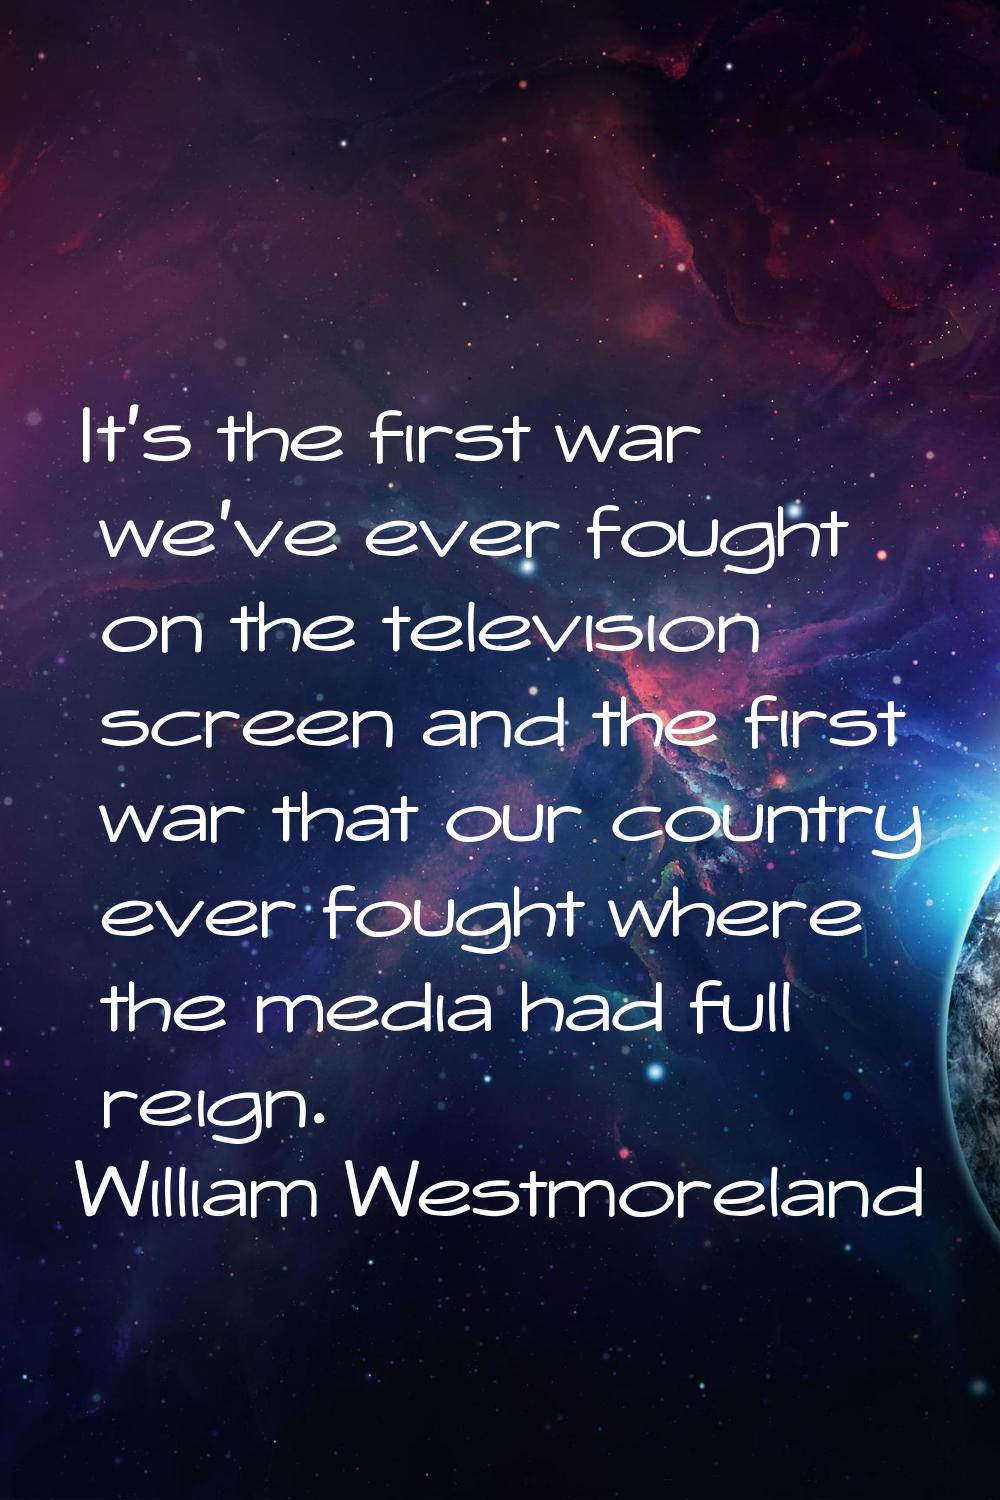 It's the first war we've ever fought on the television screen and the first war that our country ev